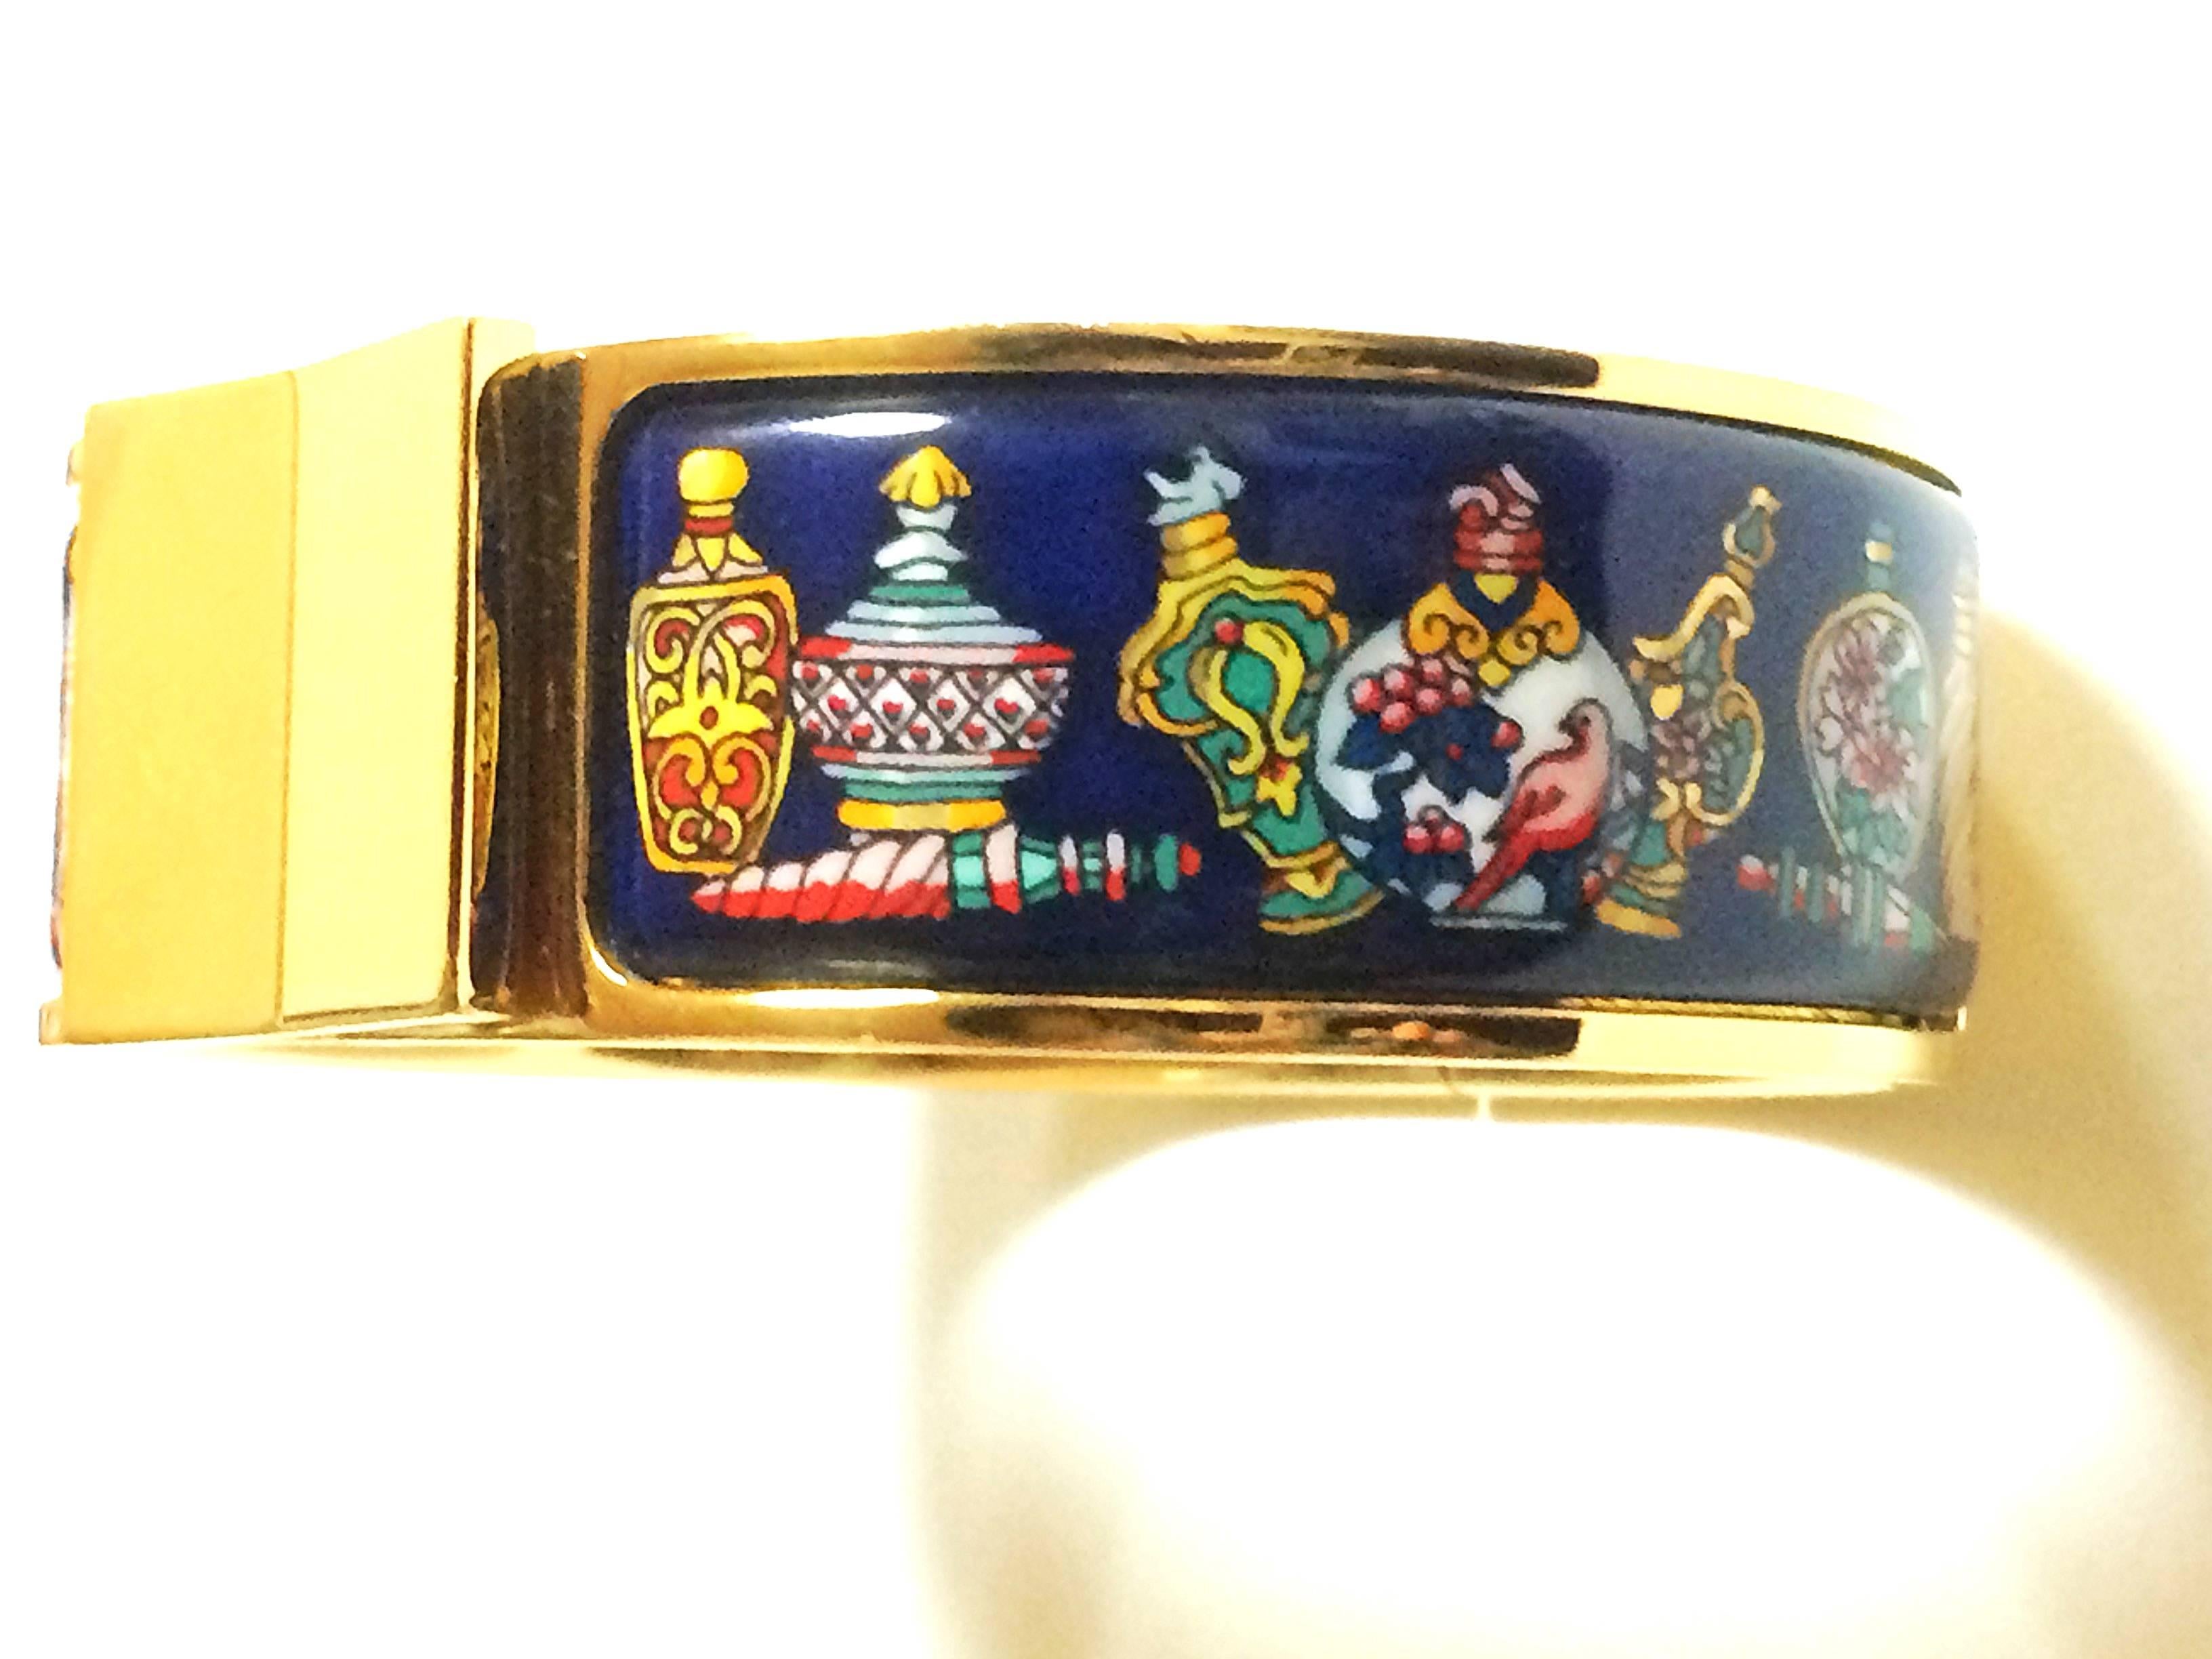 1990s.Vintage Hermes cloisonne enamel golden click and clack Flacon bangle with navy blue and colorful perfume bottle design. Great gift idea.

Fabulous bangle in HERMES's iconic cloisonne enamel.
Excellent beauty and elegance with with navy blue